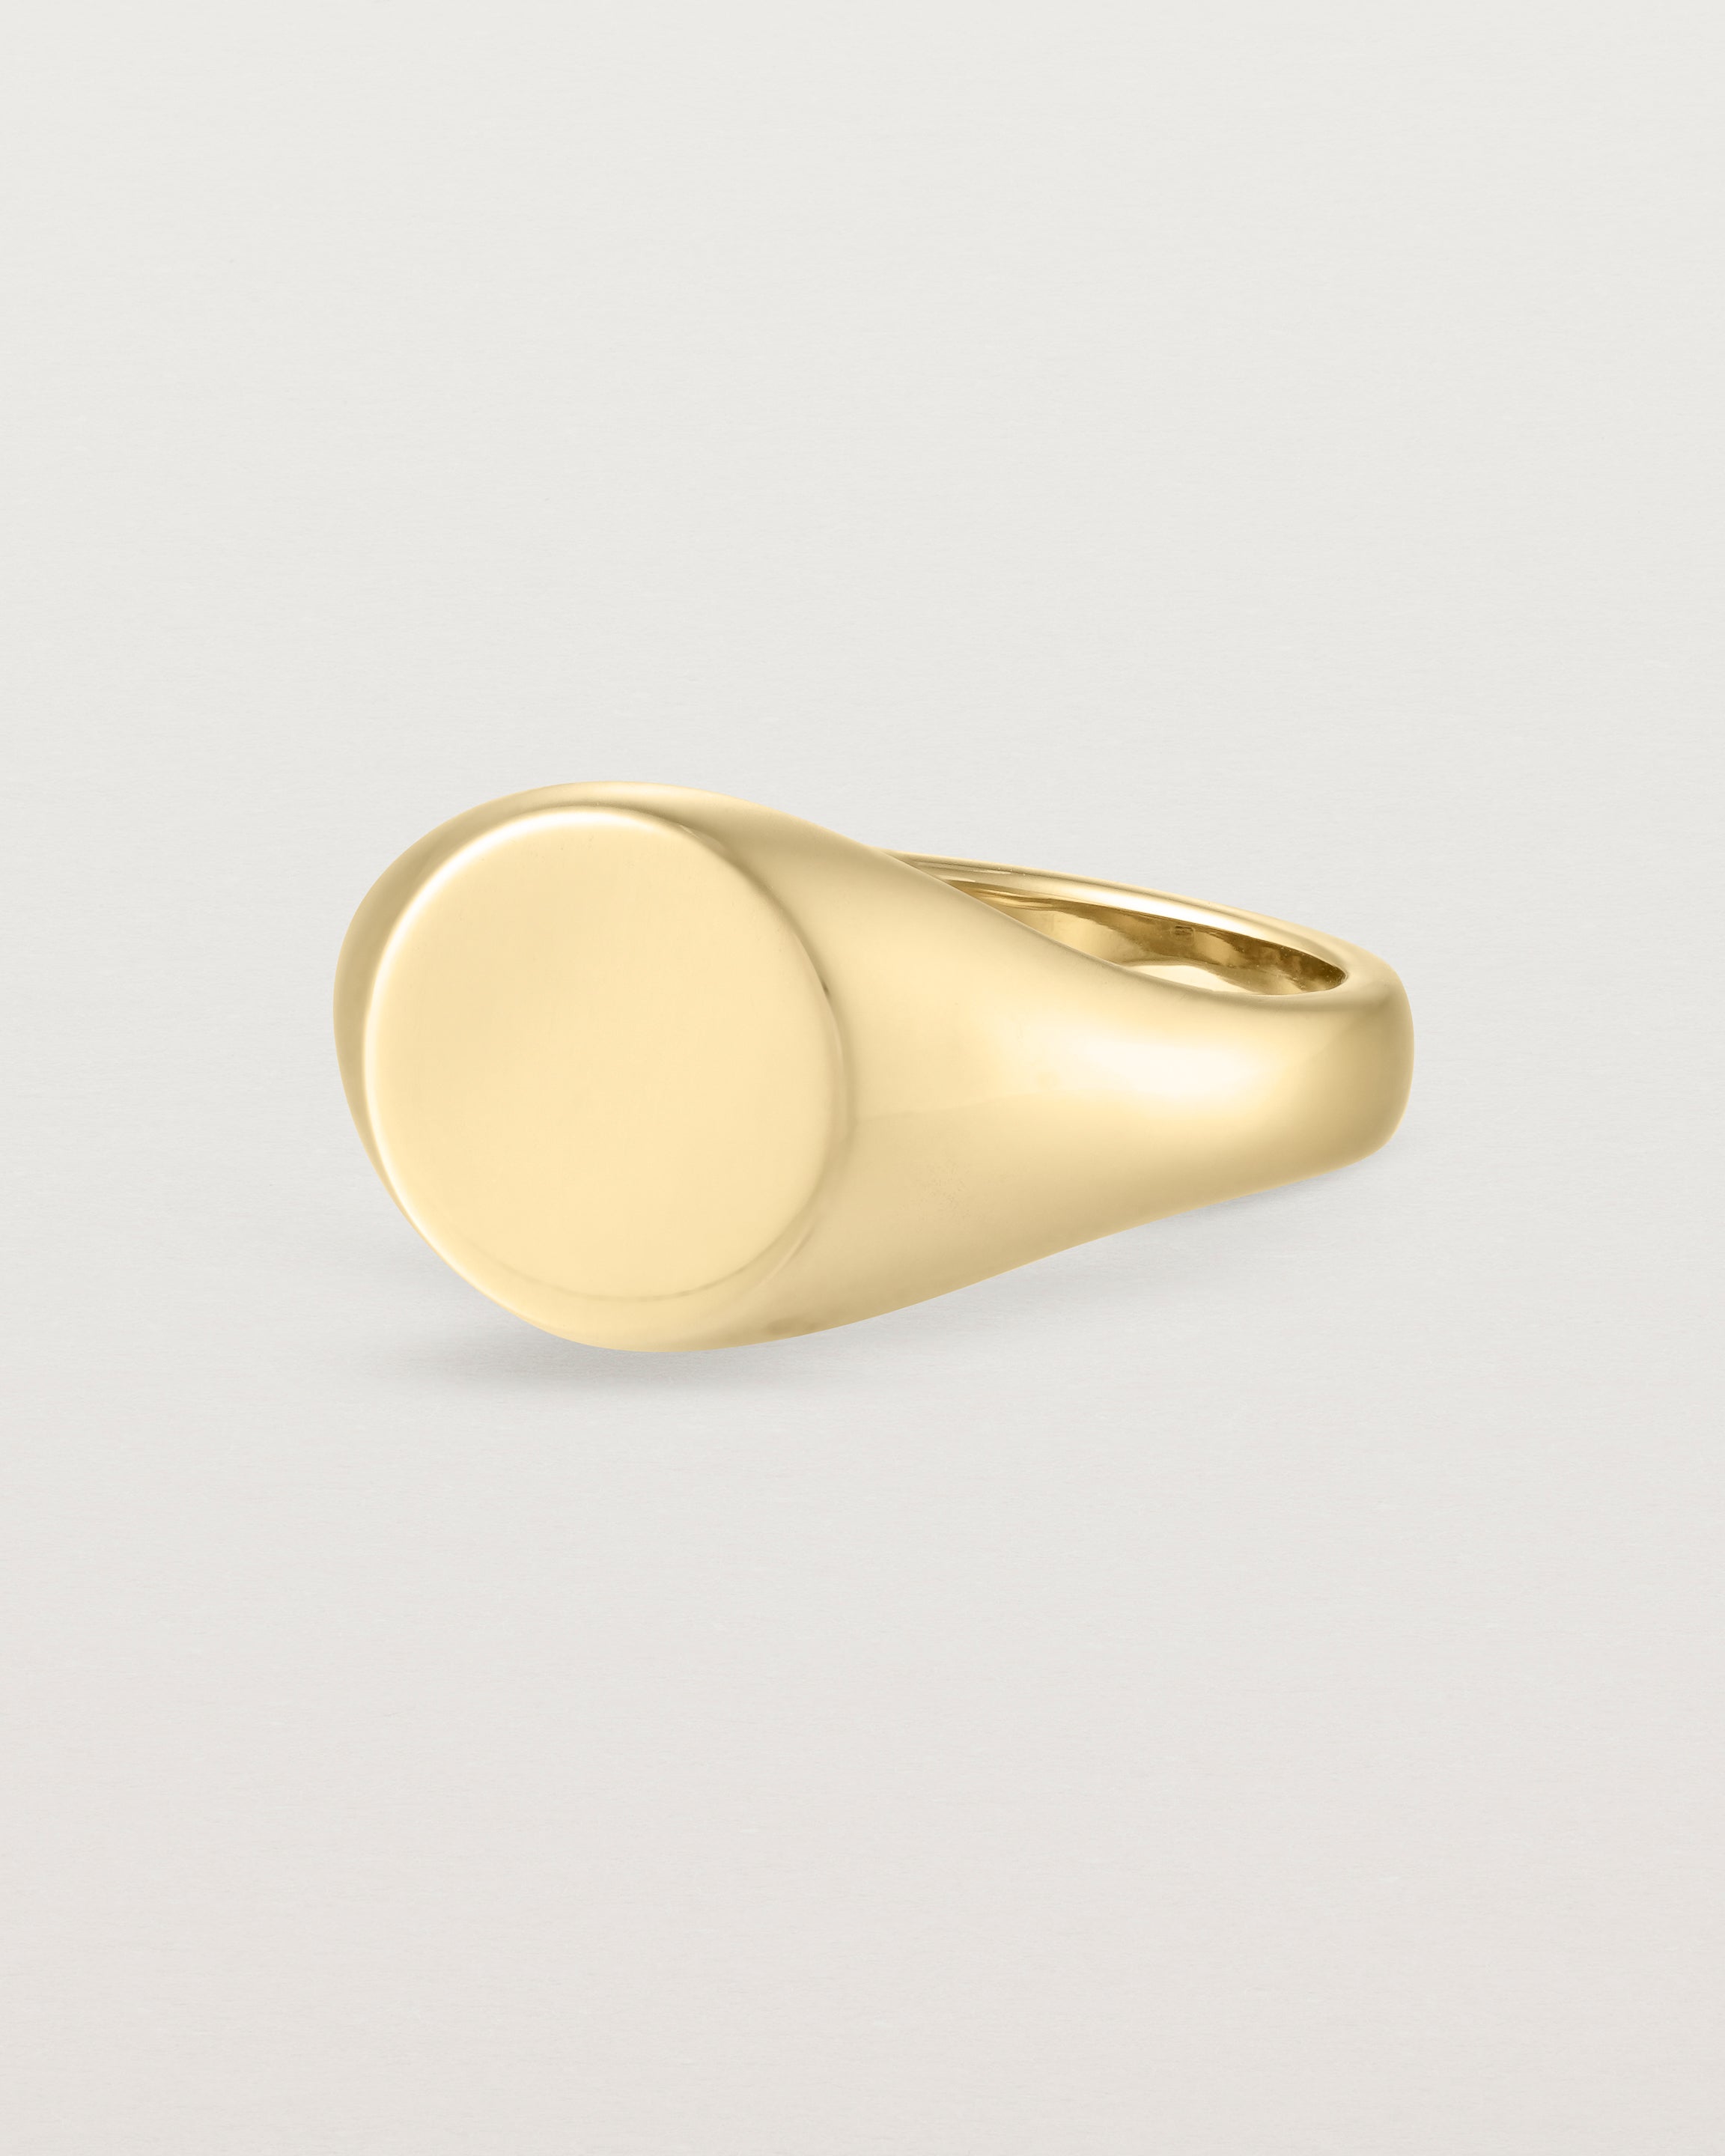 Angled view of the Kian Signet Ring | Yellow Gold.